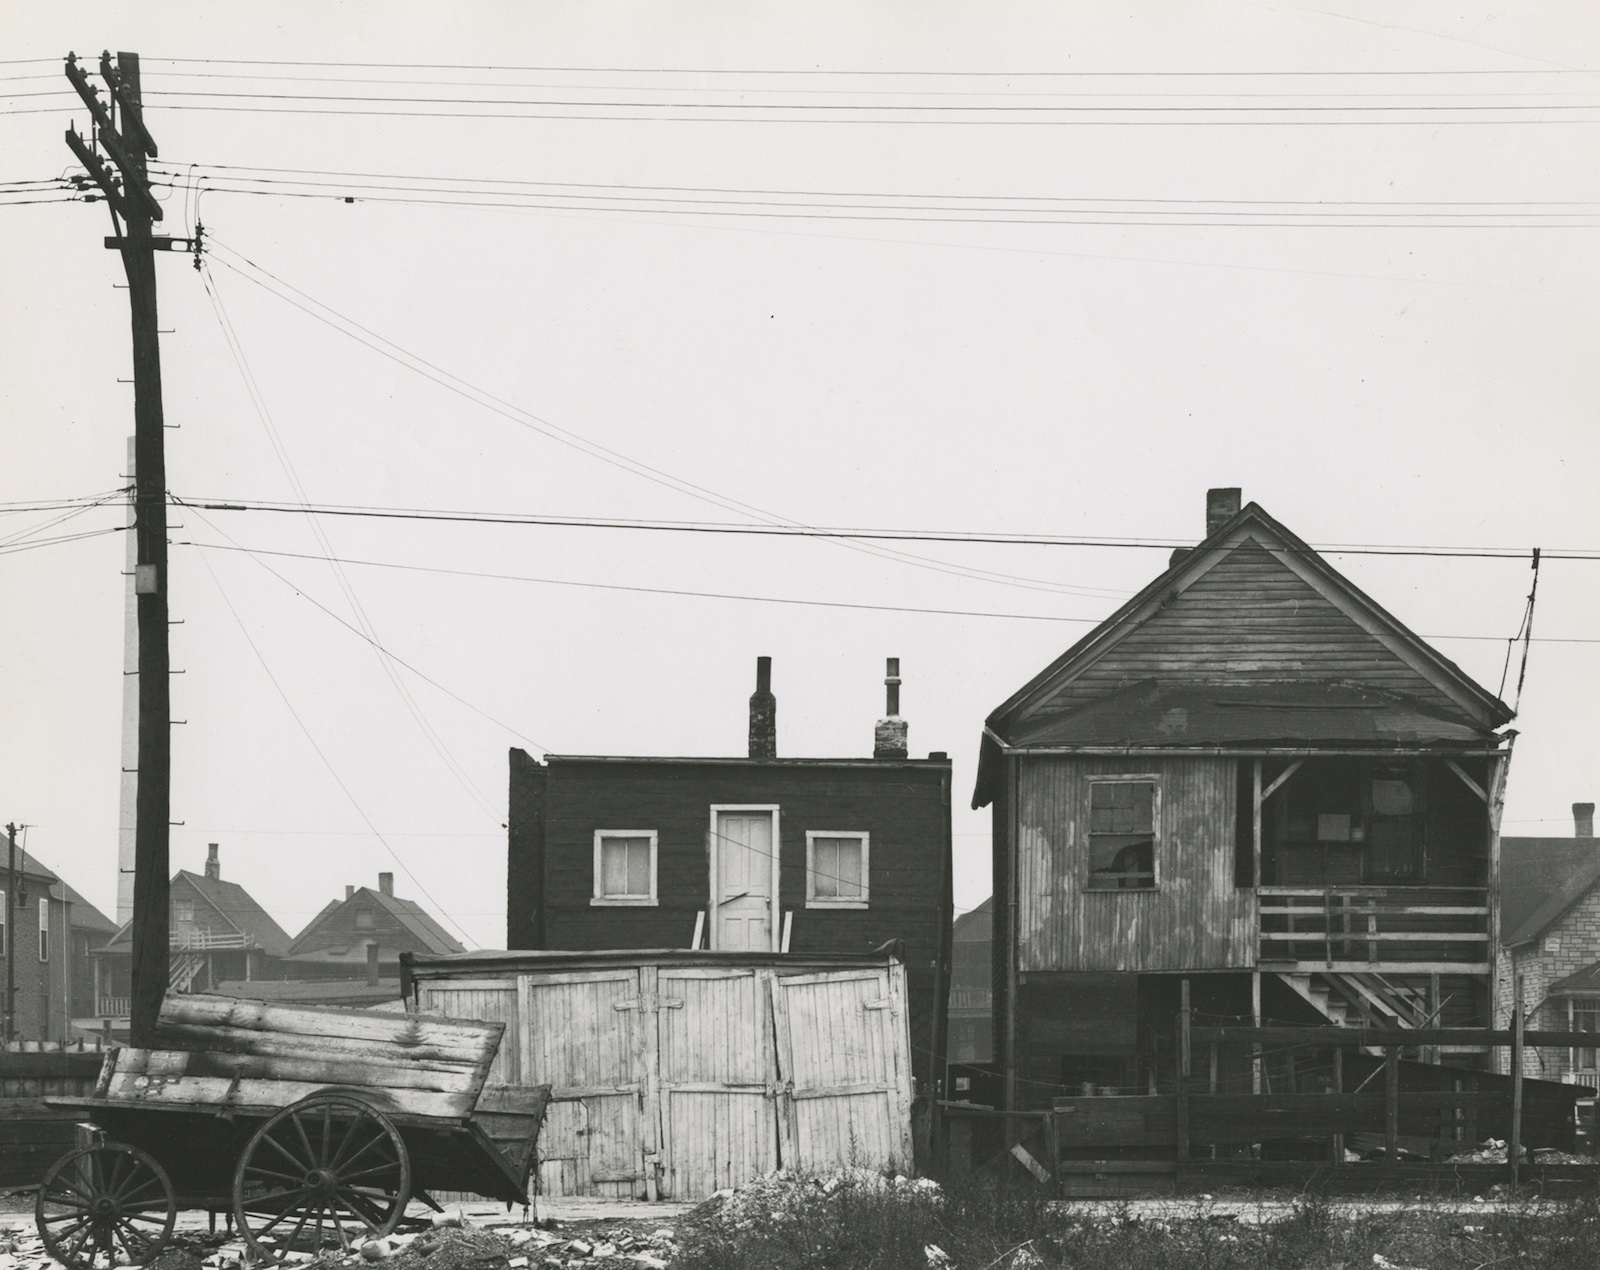 Wooden Houses, Southside, Chicago, 1950